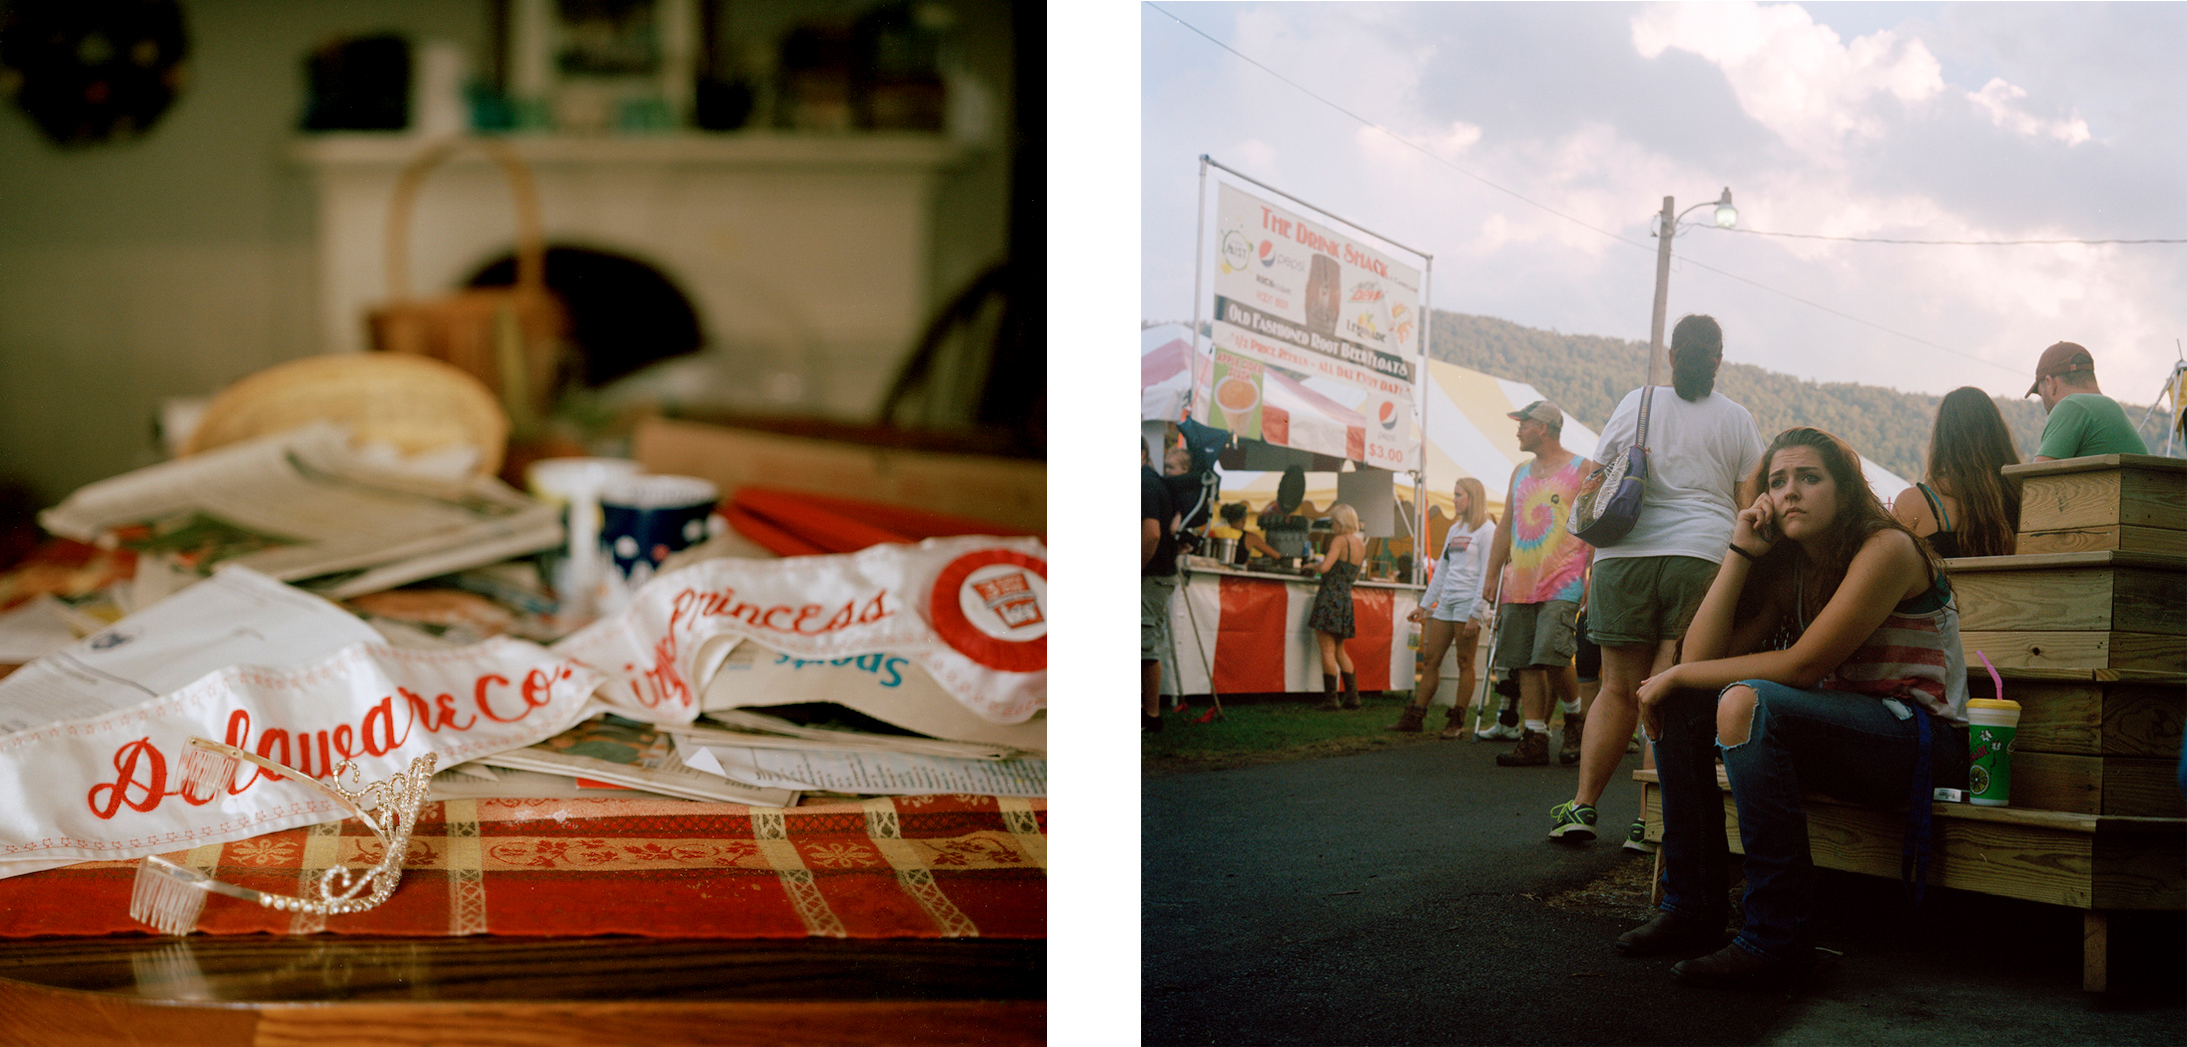  L: Miquela Hanselman’s Delaware County Dairy Princess sash on her family’s dining room table. R: The Delaware County Fair.   